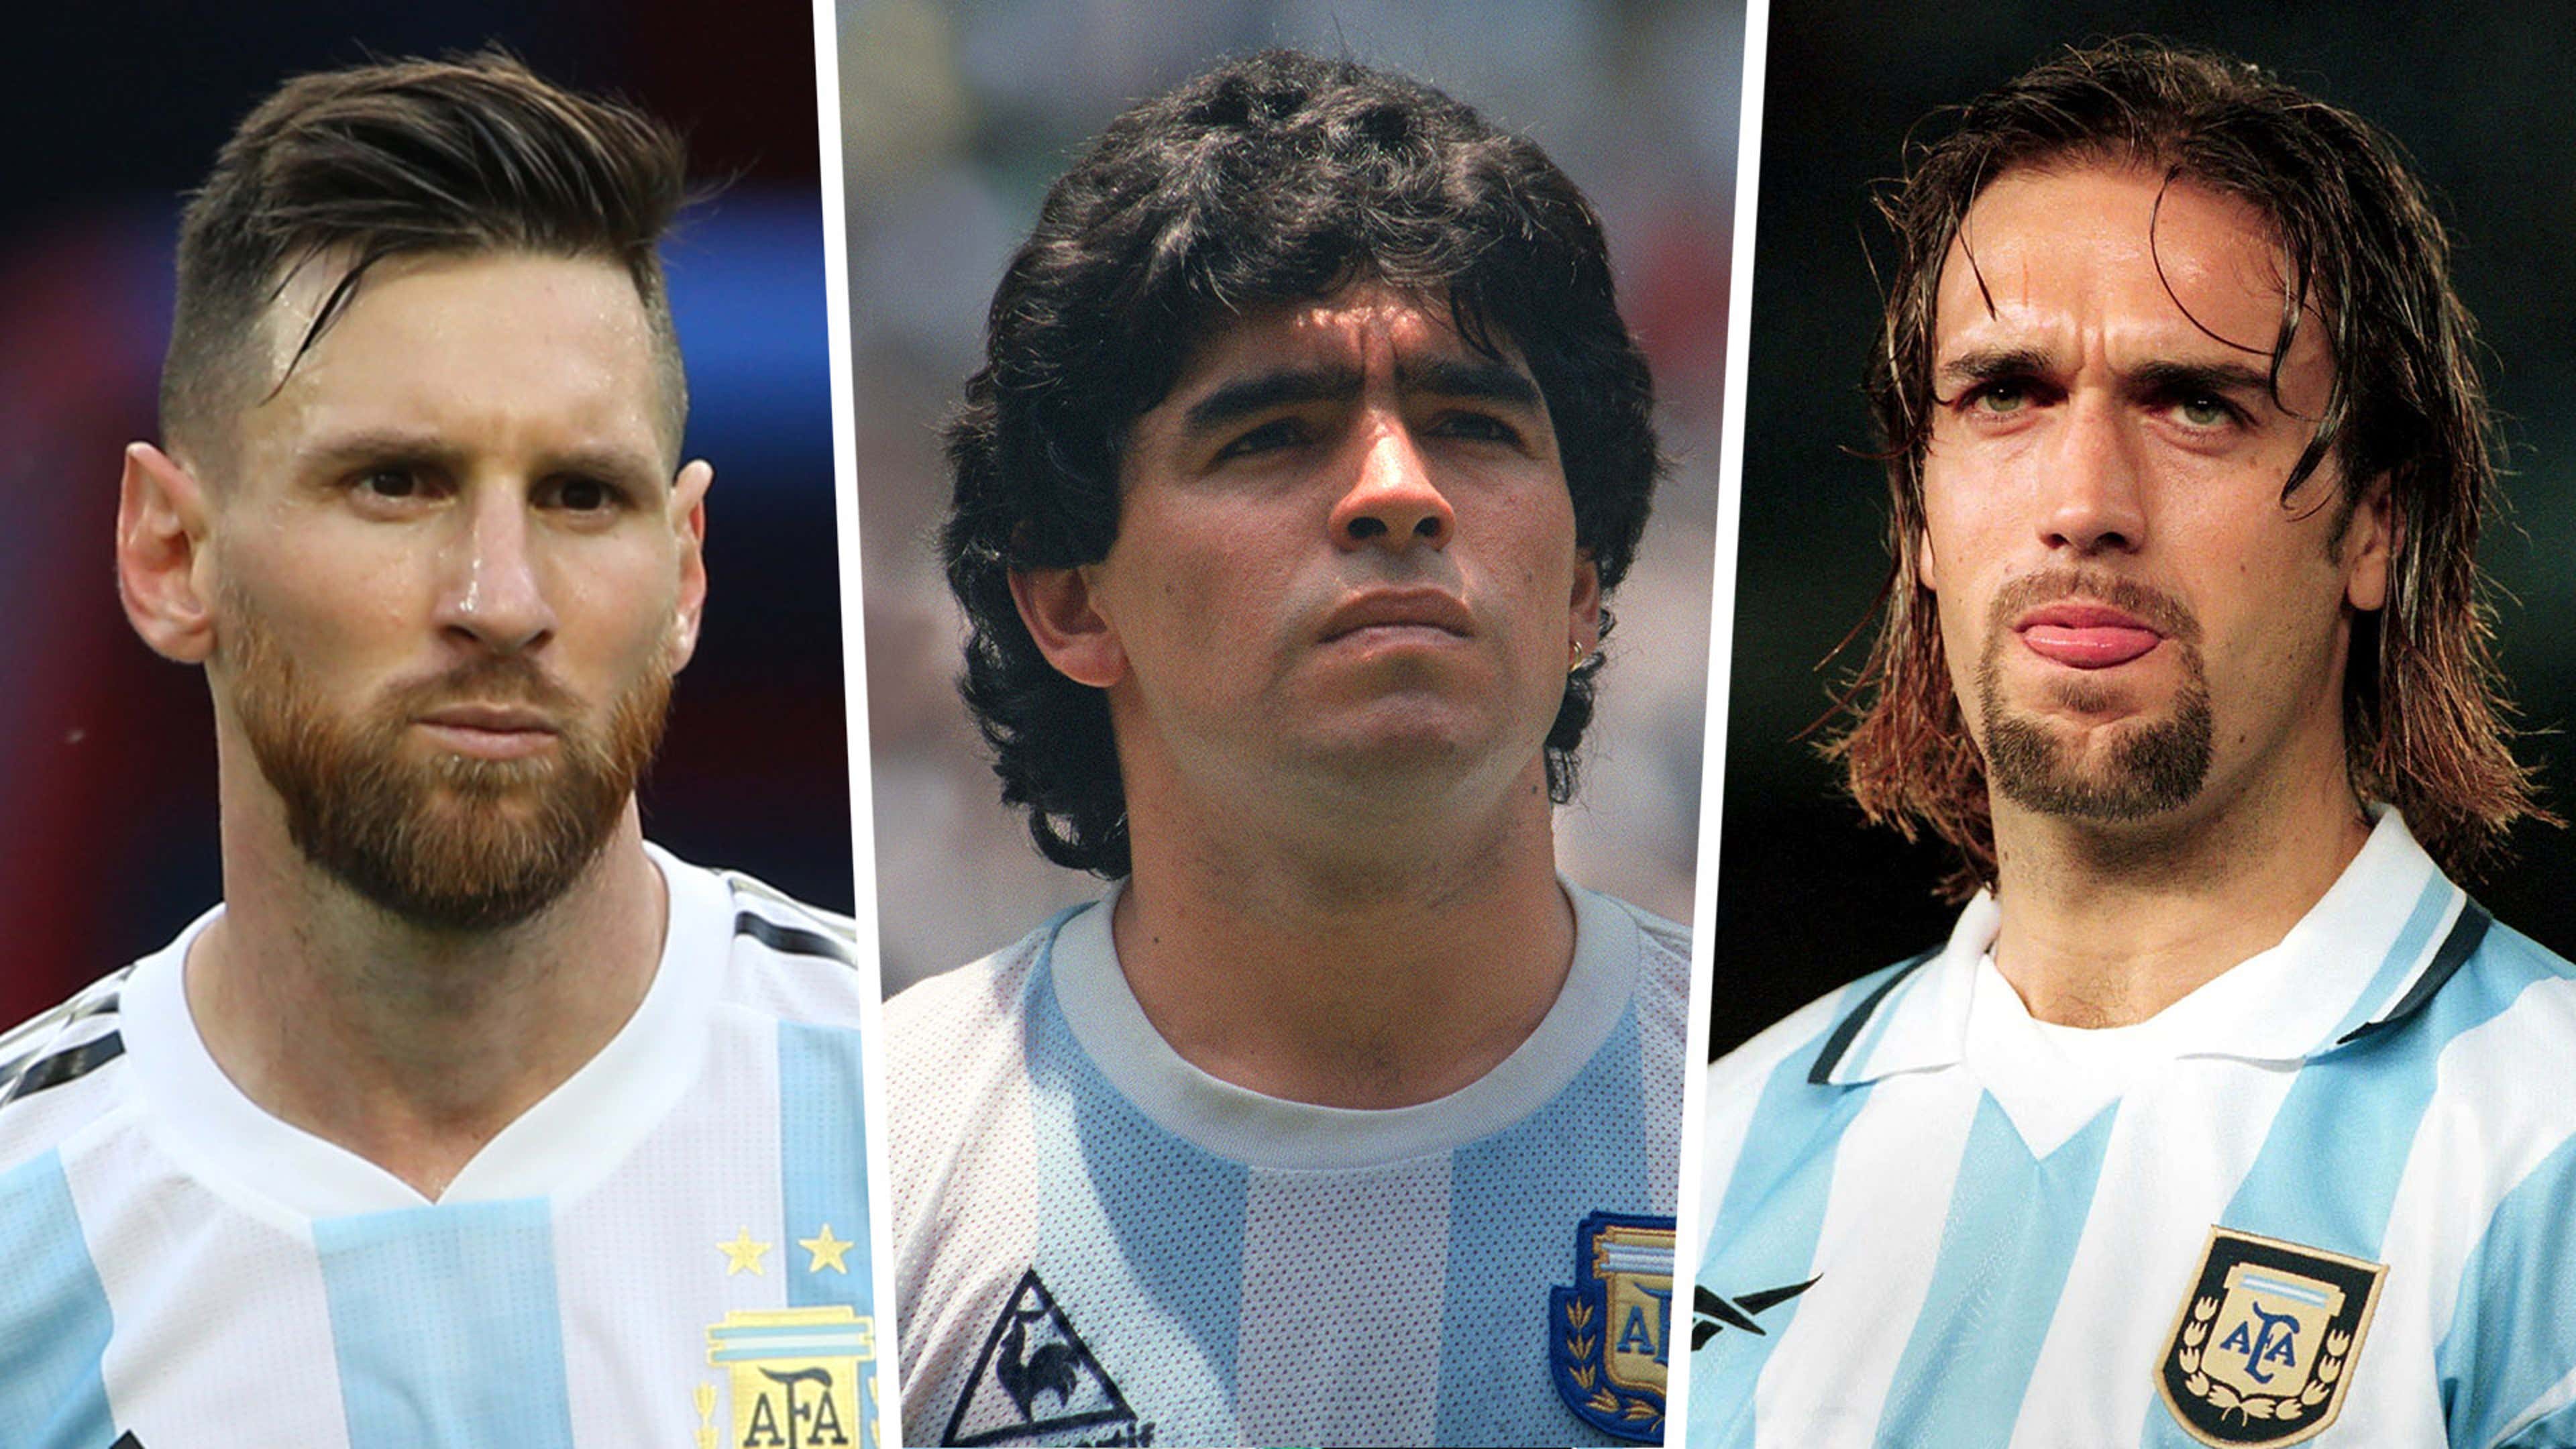 No Messi or Ronaldo as Maradona names Di Stefano as the best player in  history